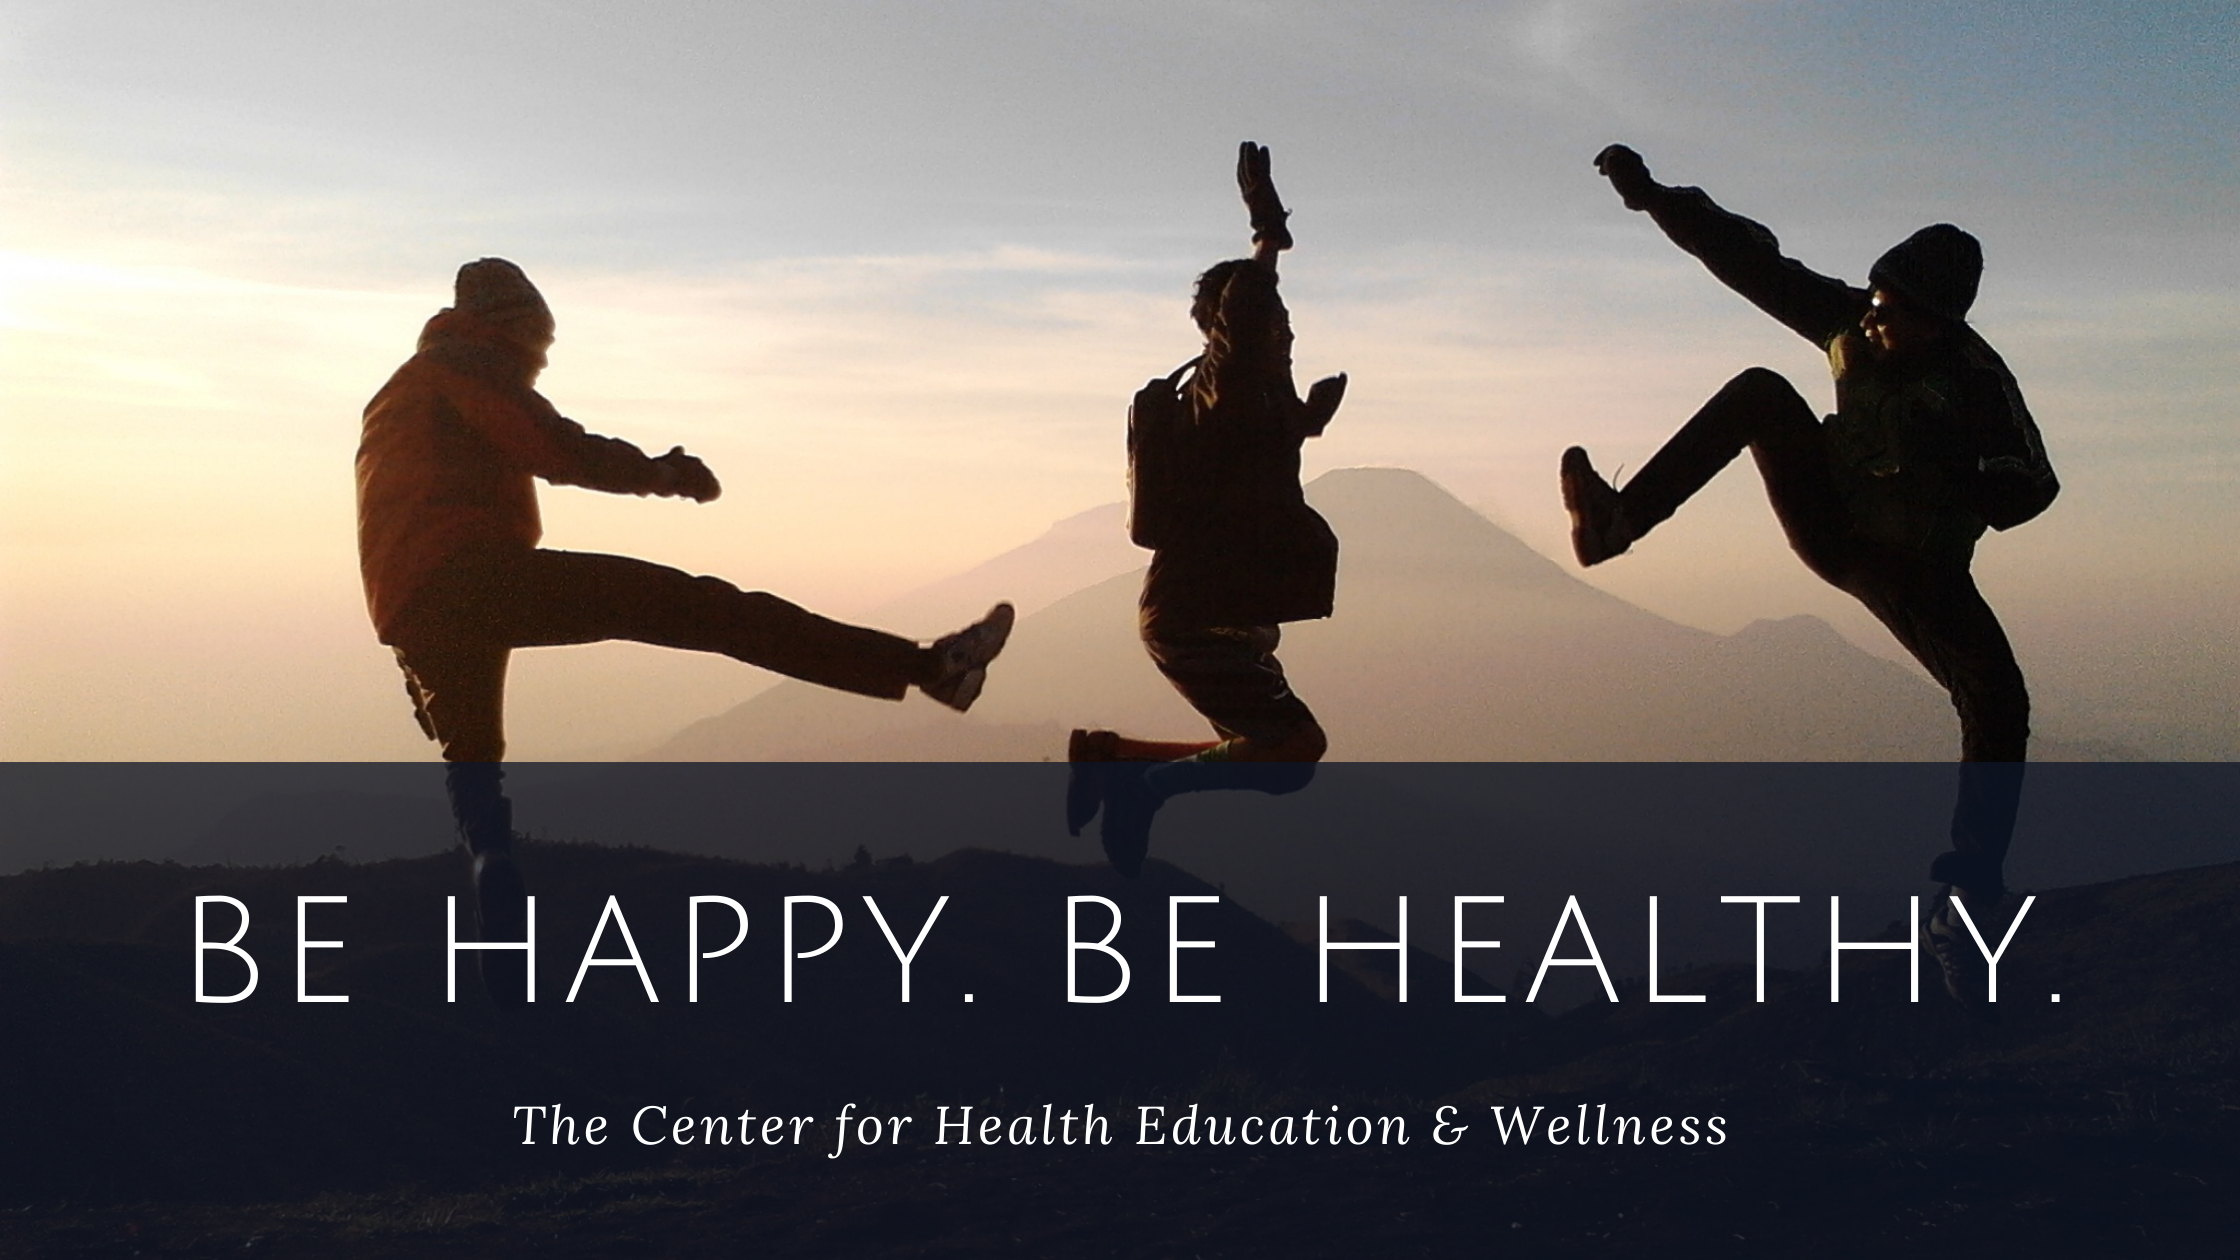 A picture of three people jumping and the text "Be Happy, Be Healthy"